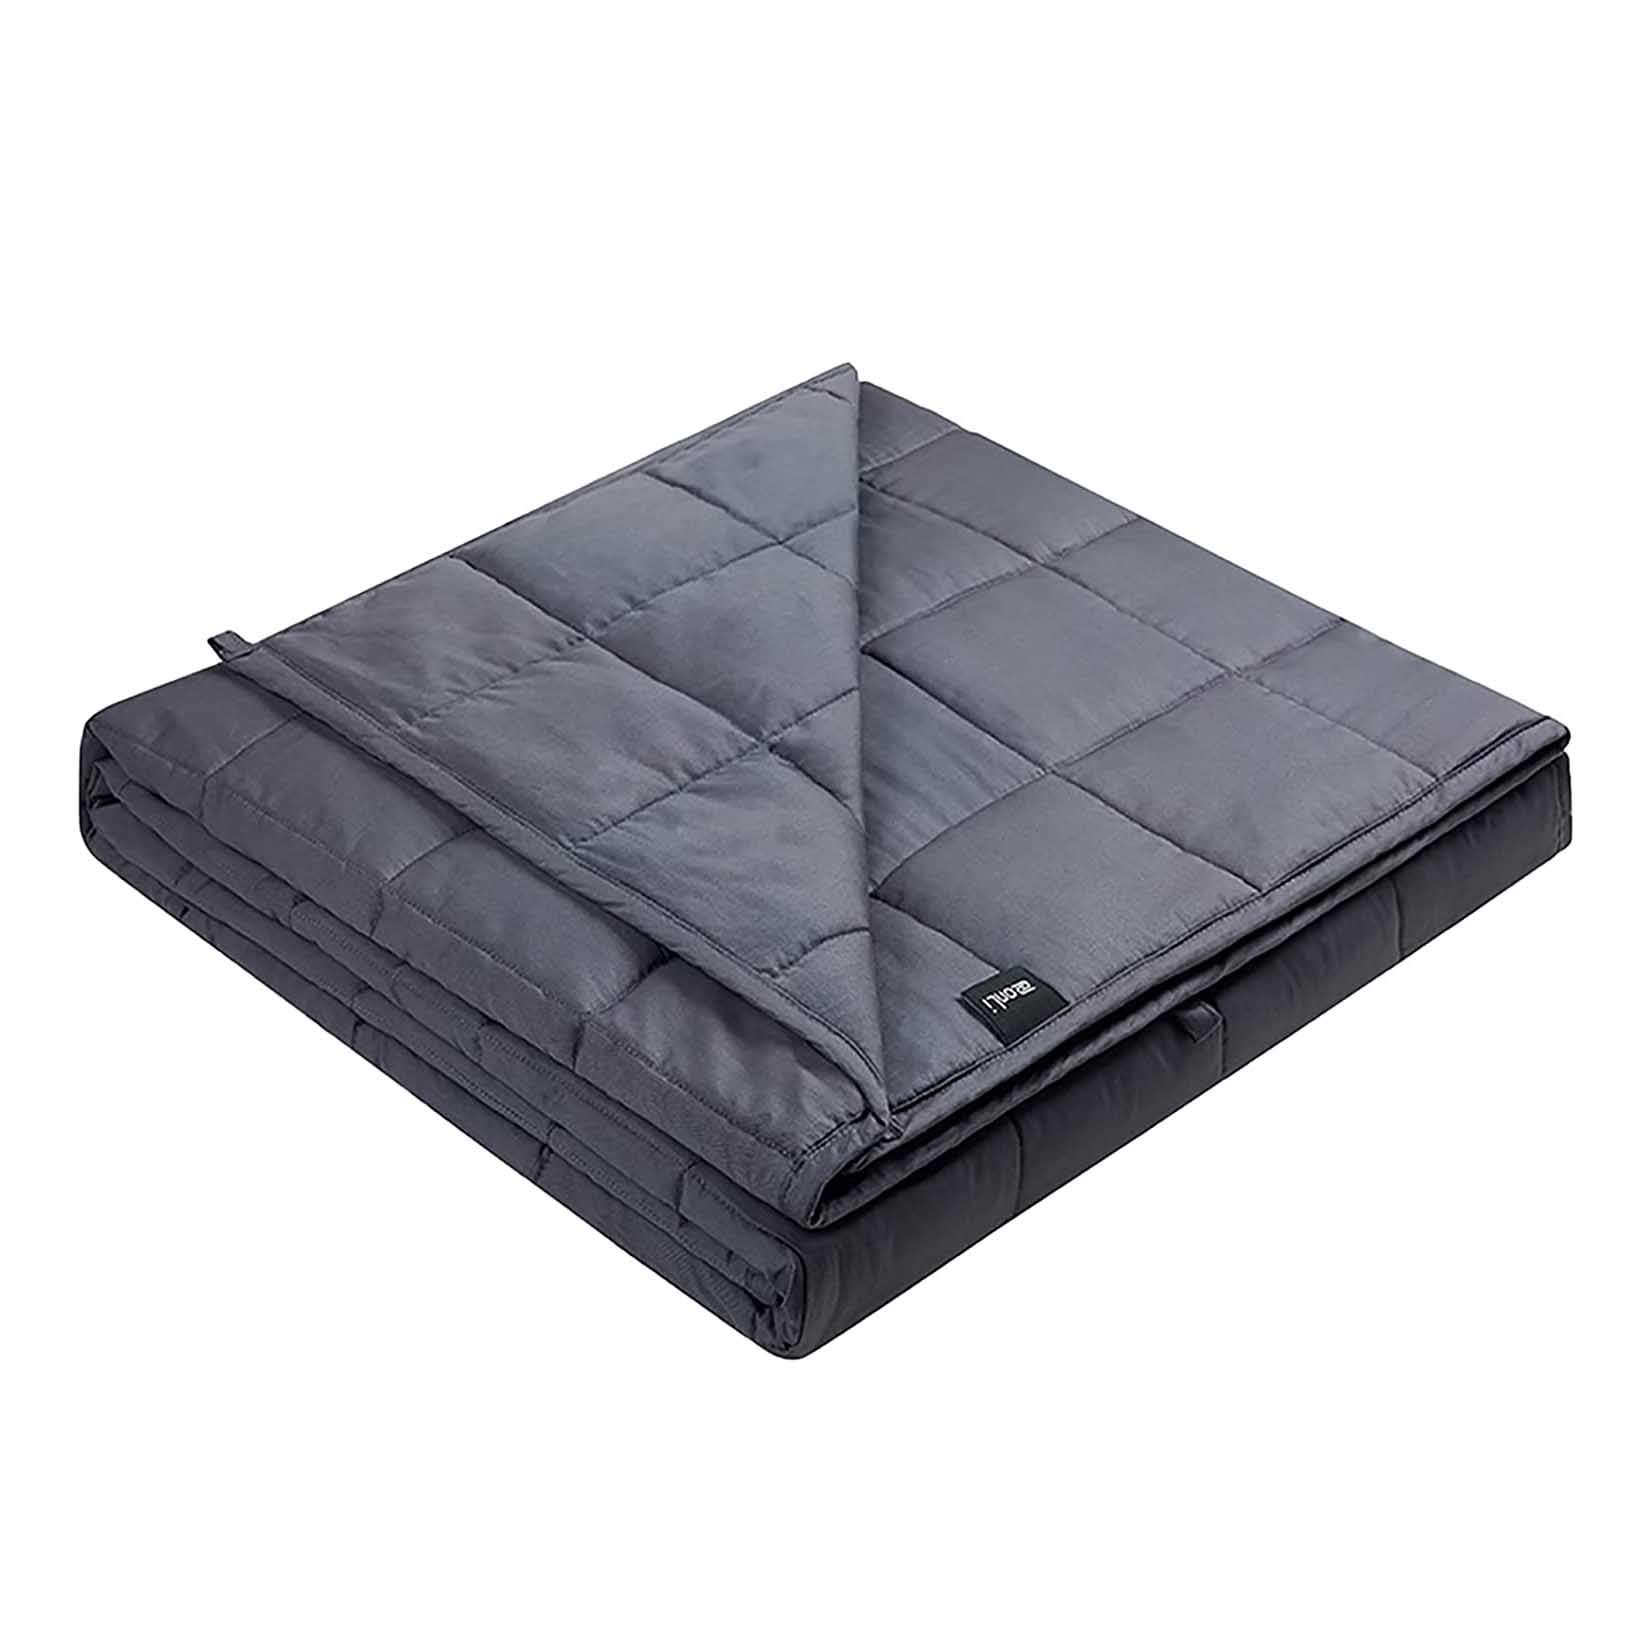 ODM Discount Knitted Weighted Blanket Product- Weighted Blanket (60”x80”, 20lbs, Dark Grey), Cooling Weighted Blanket for Adults, High Breathability Heavy Blanket, Soft Material with P...